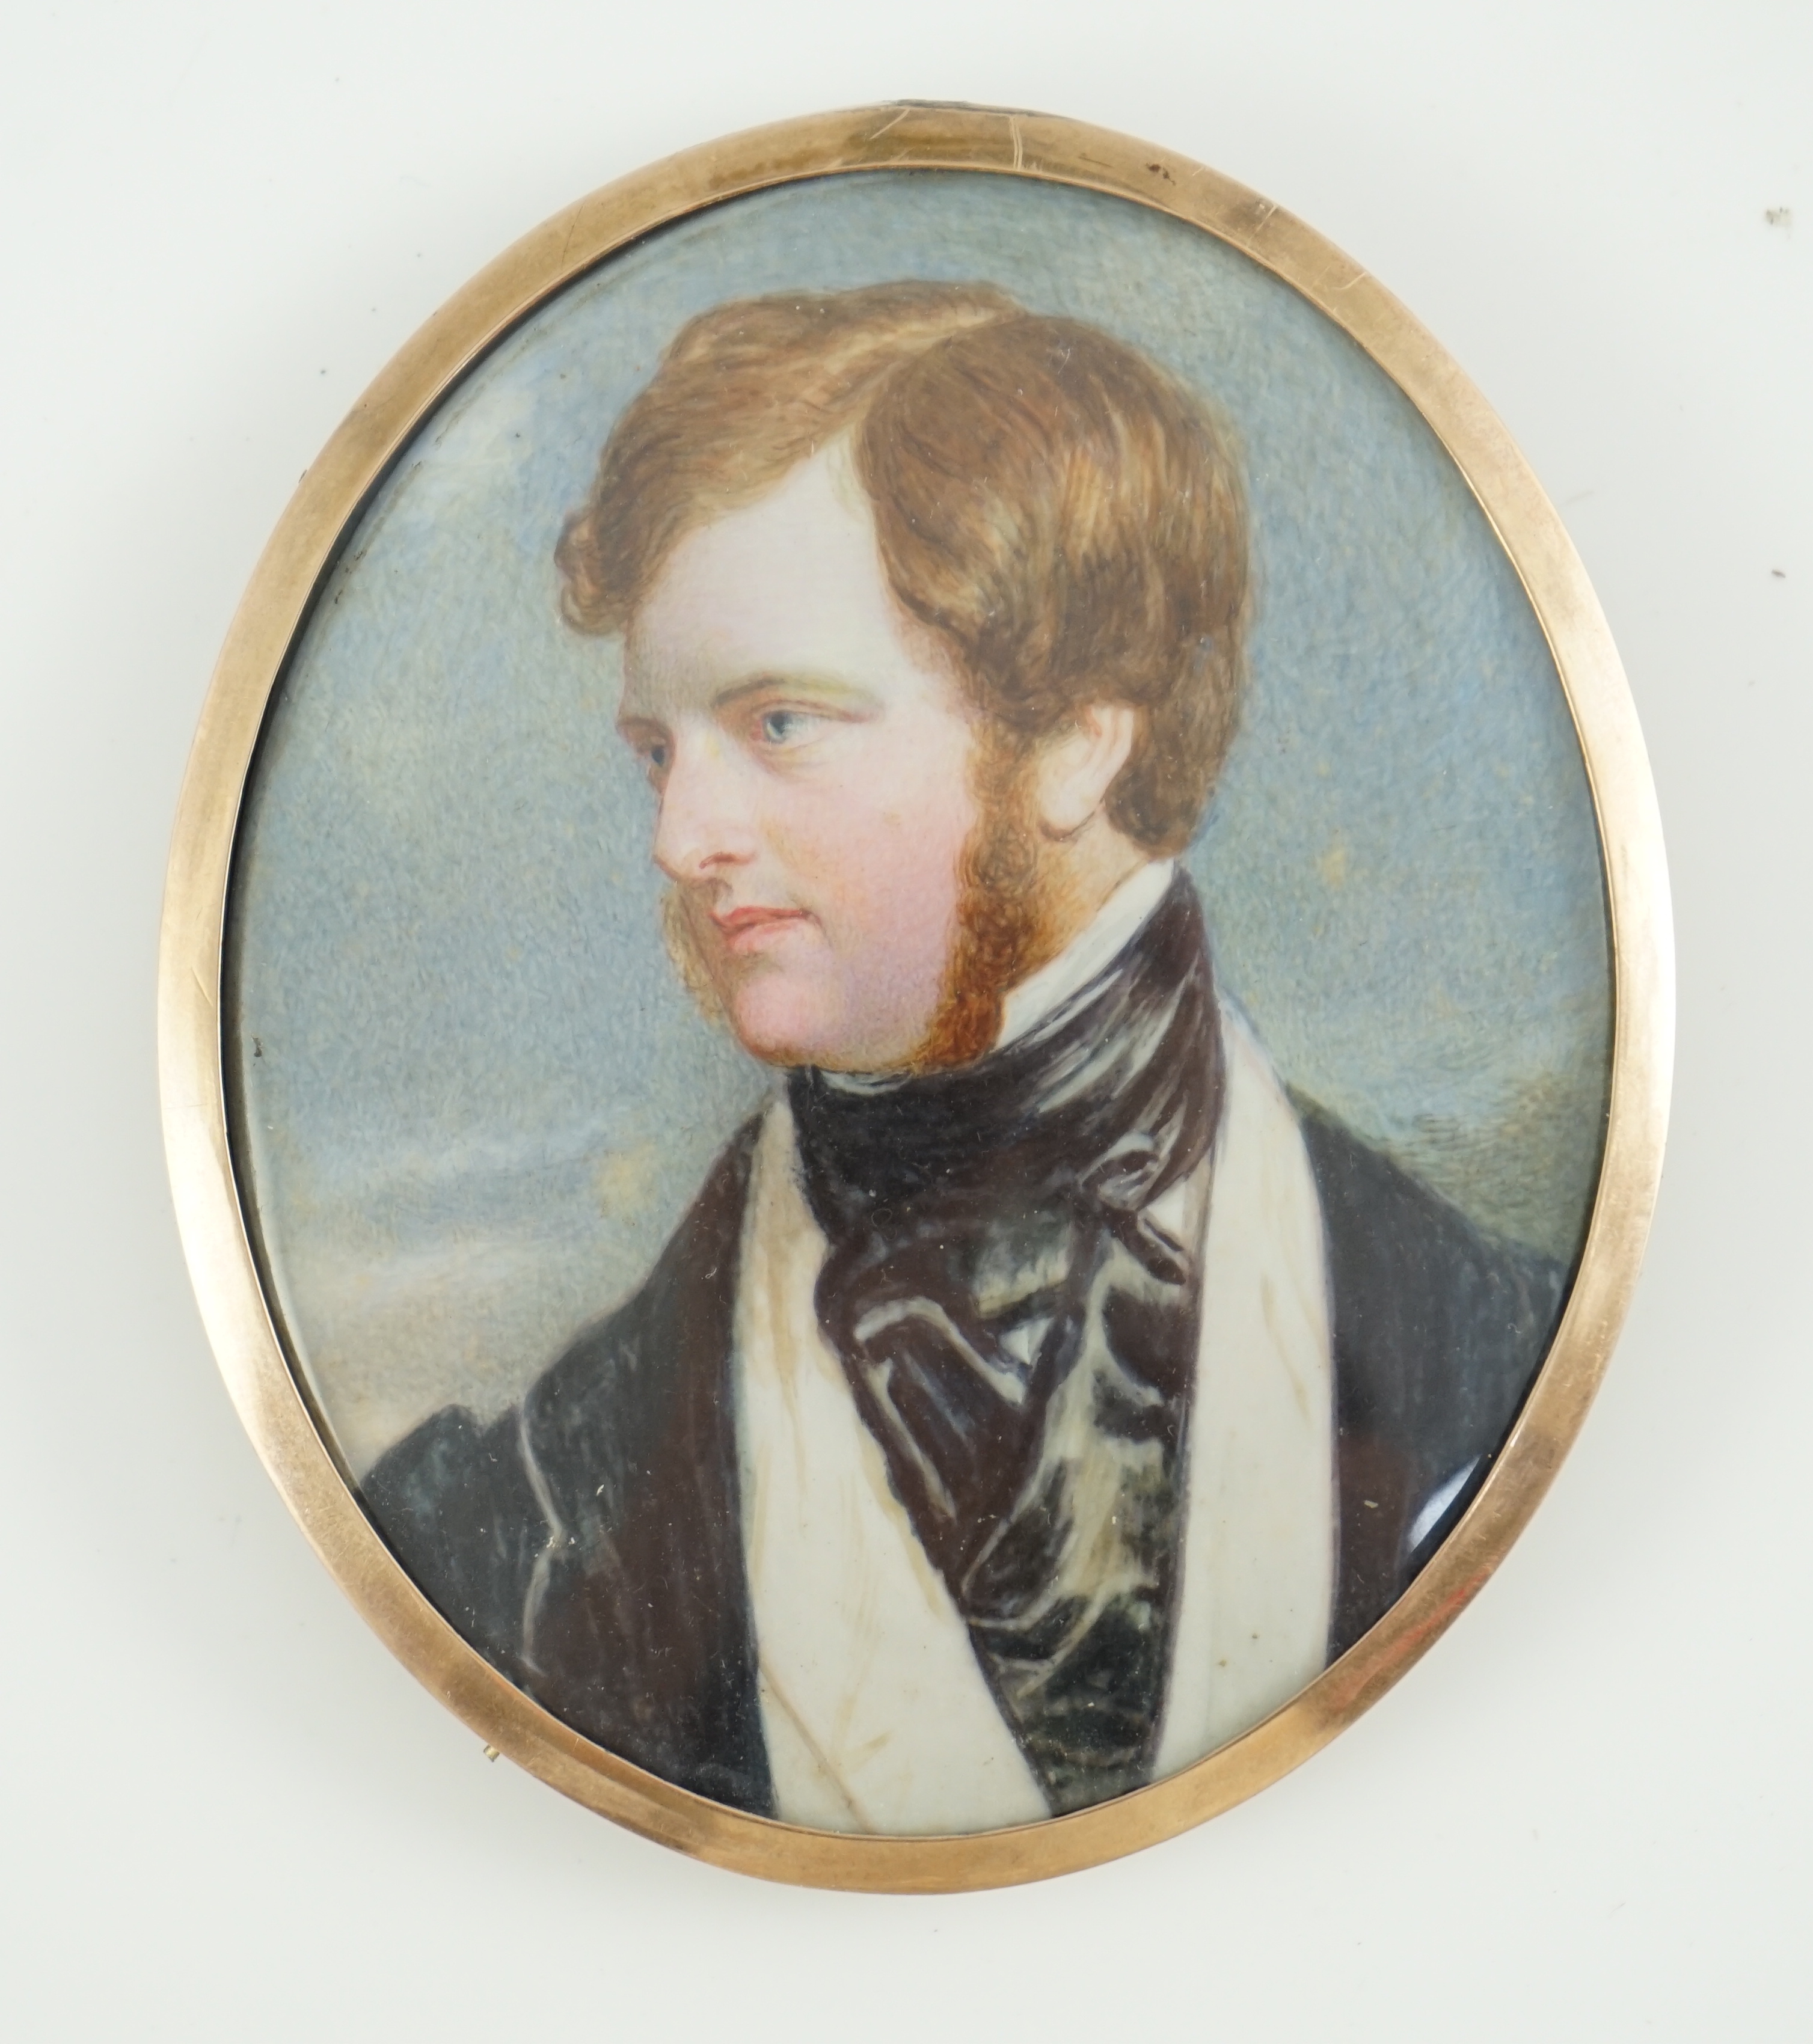 Attributed to Miss J. Ziegler (fl.1844-1863), Portrait miniature of a red haired gentleman, watercolour on ivory, 7.8 x 6.6cm. CITES submission reference 7V9G24S6